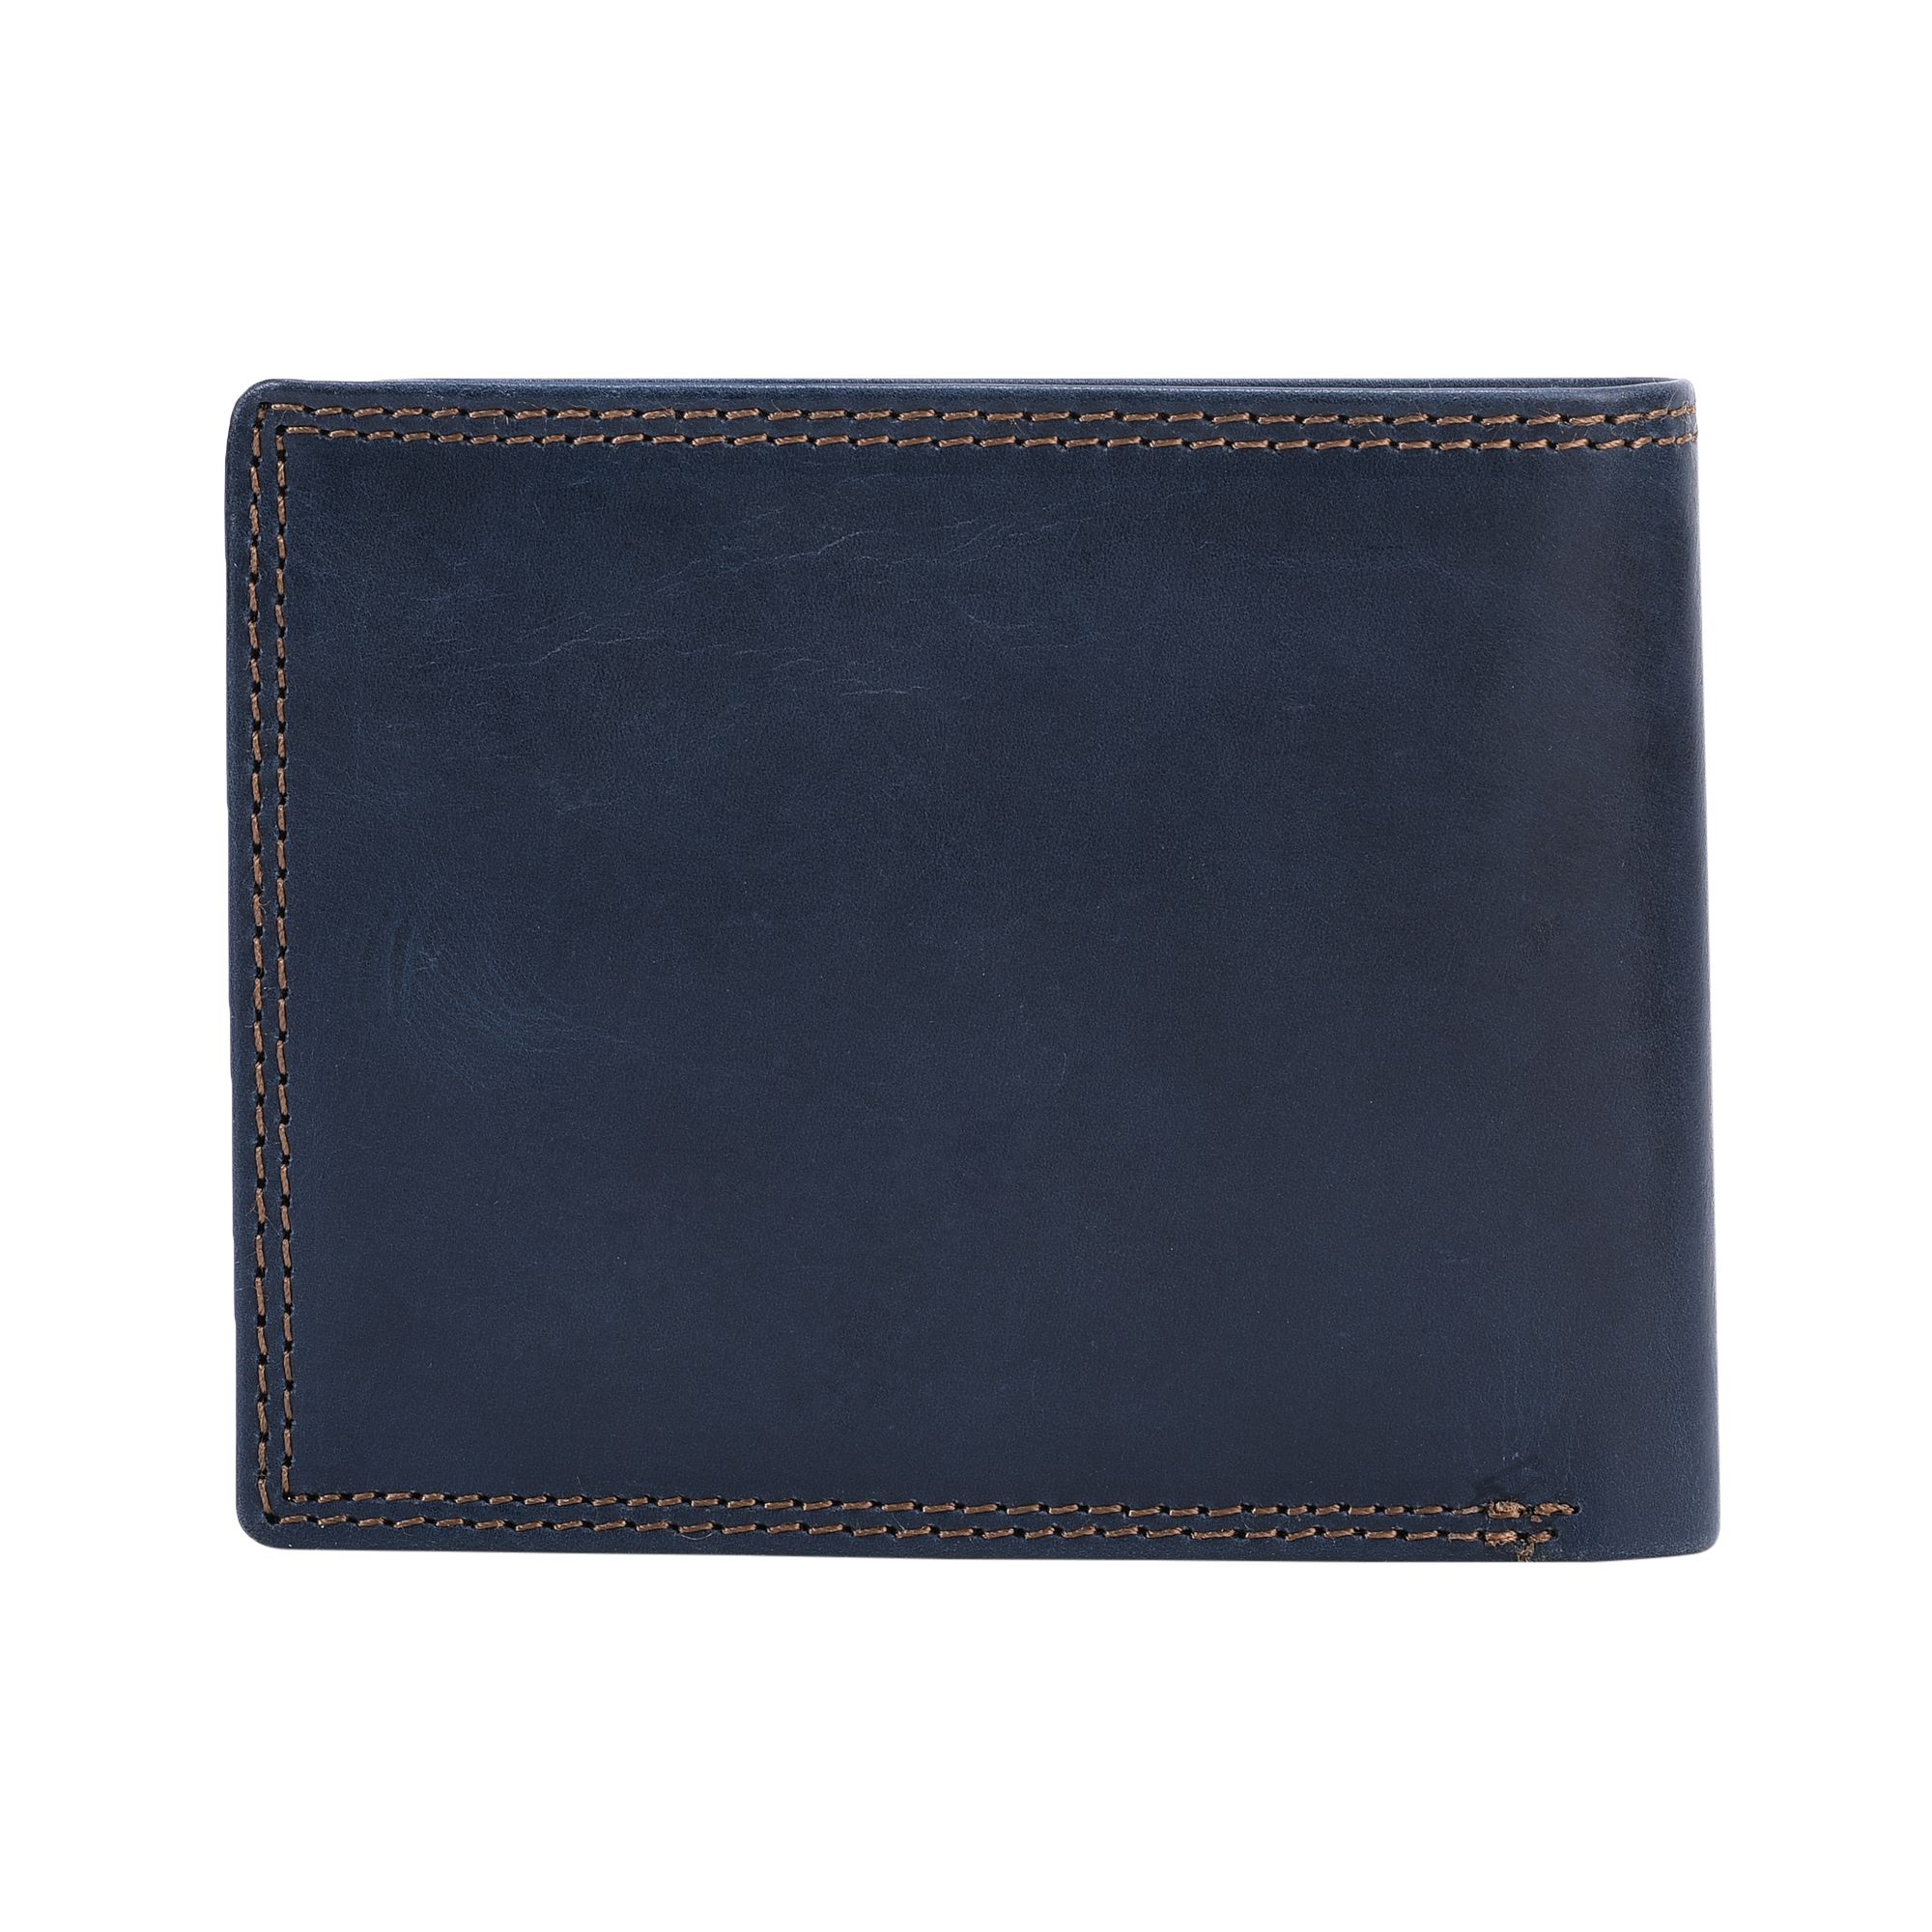 NAVY Leather Wallet